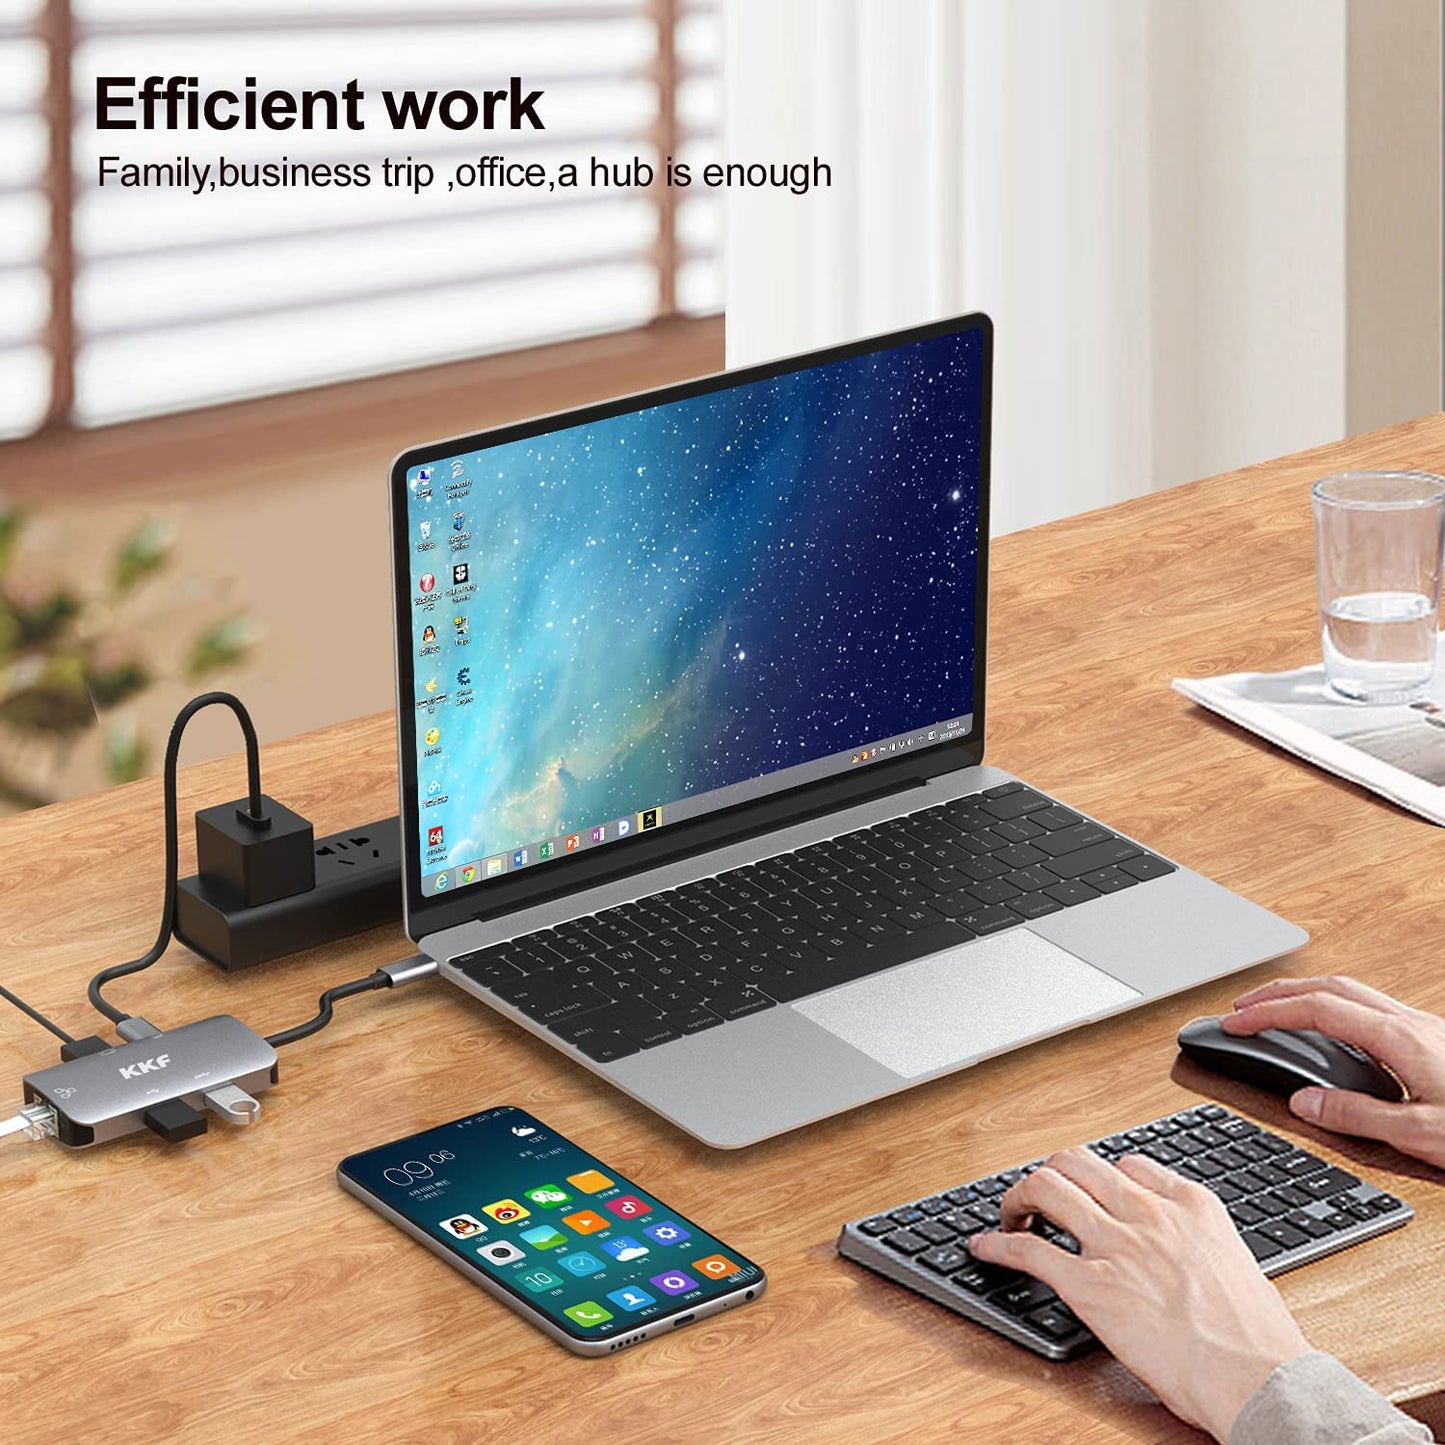 USB C Hub Adapter，5-in-1Type C Ethernet Hub PowerExpand with 4K HDMI, USB 3.0, USB 2.0, PD 3.0 Ports, for MacBook Pro, MacBook Air, Chromebook, iPad Pro, XPS, and More